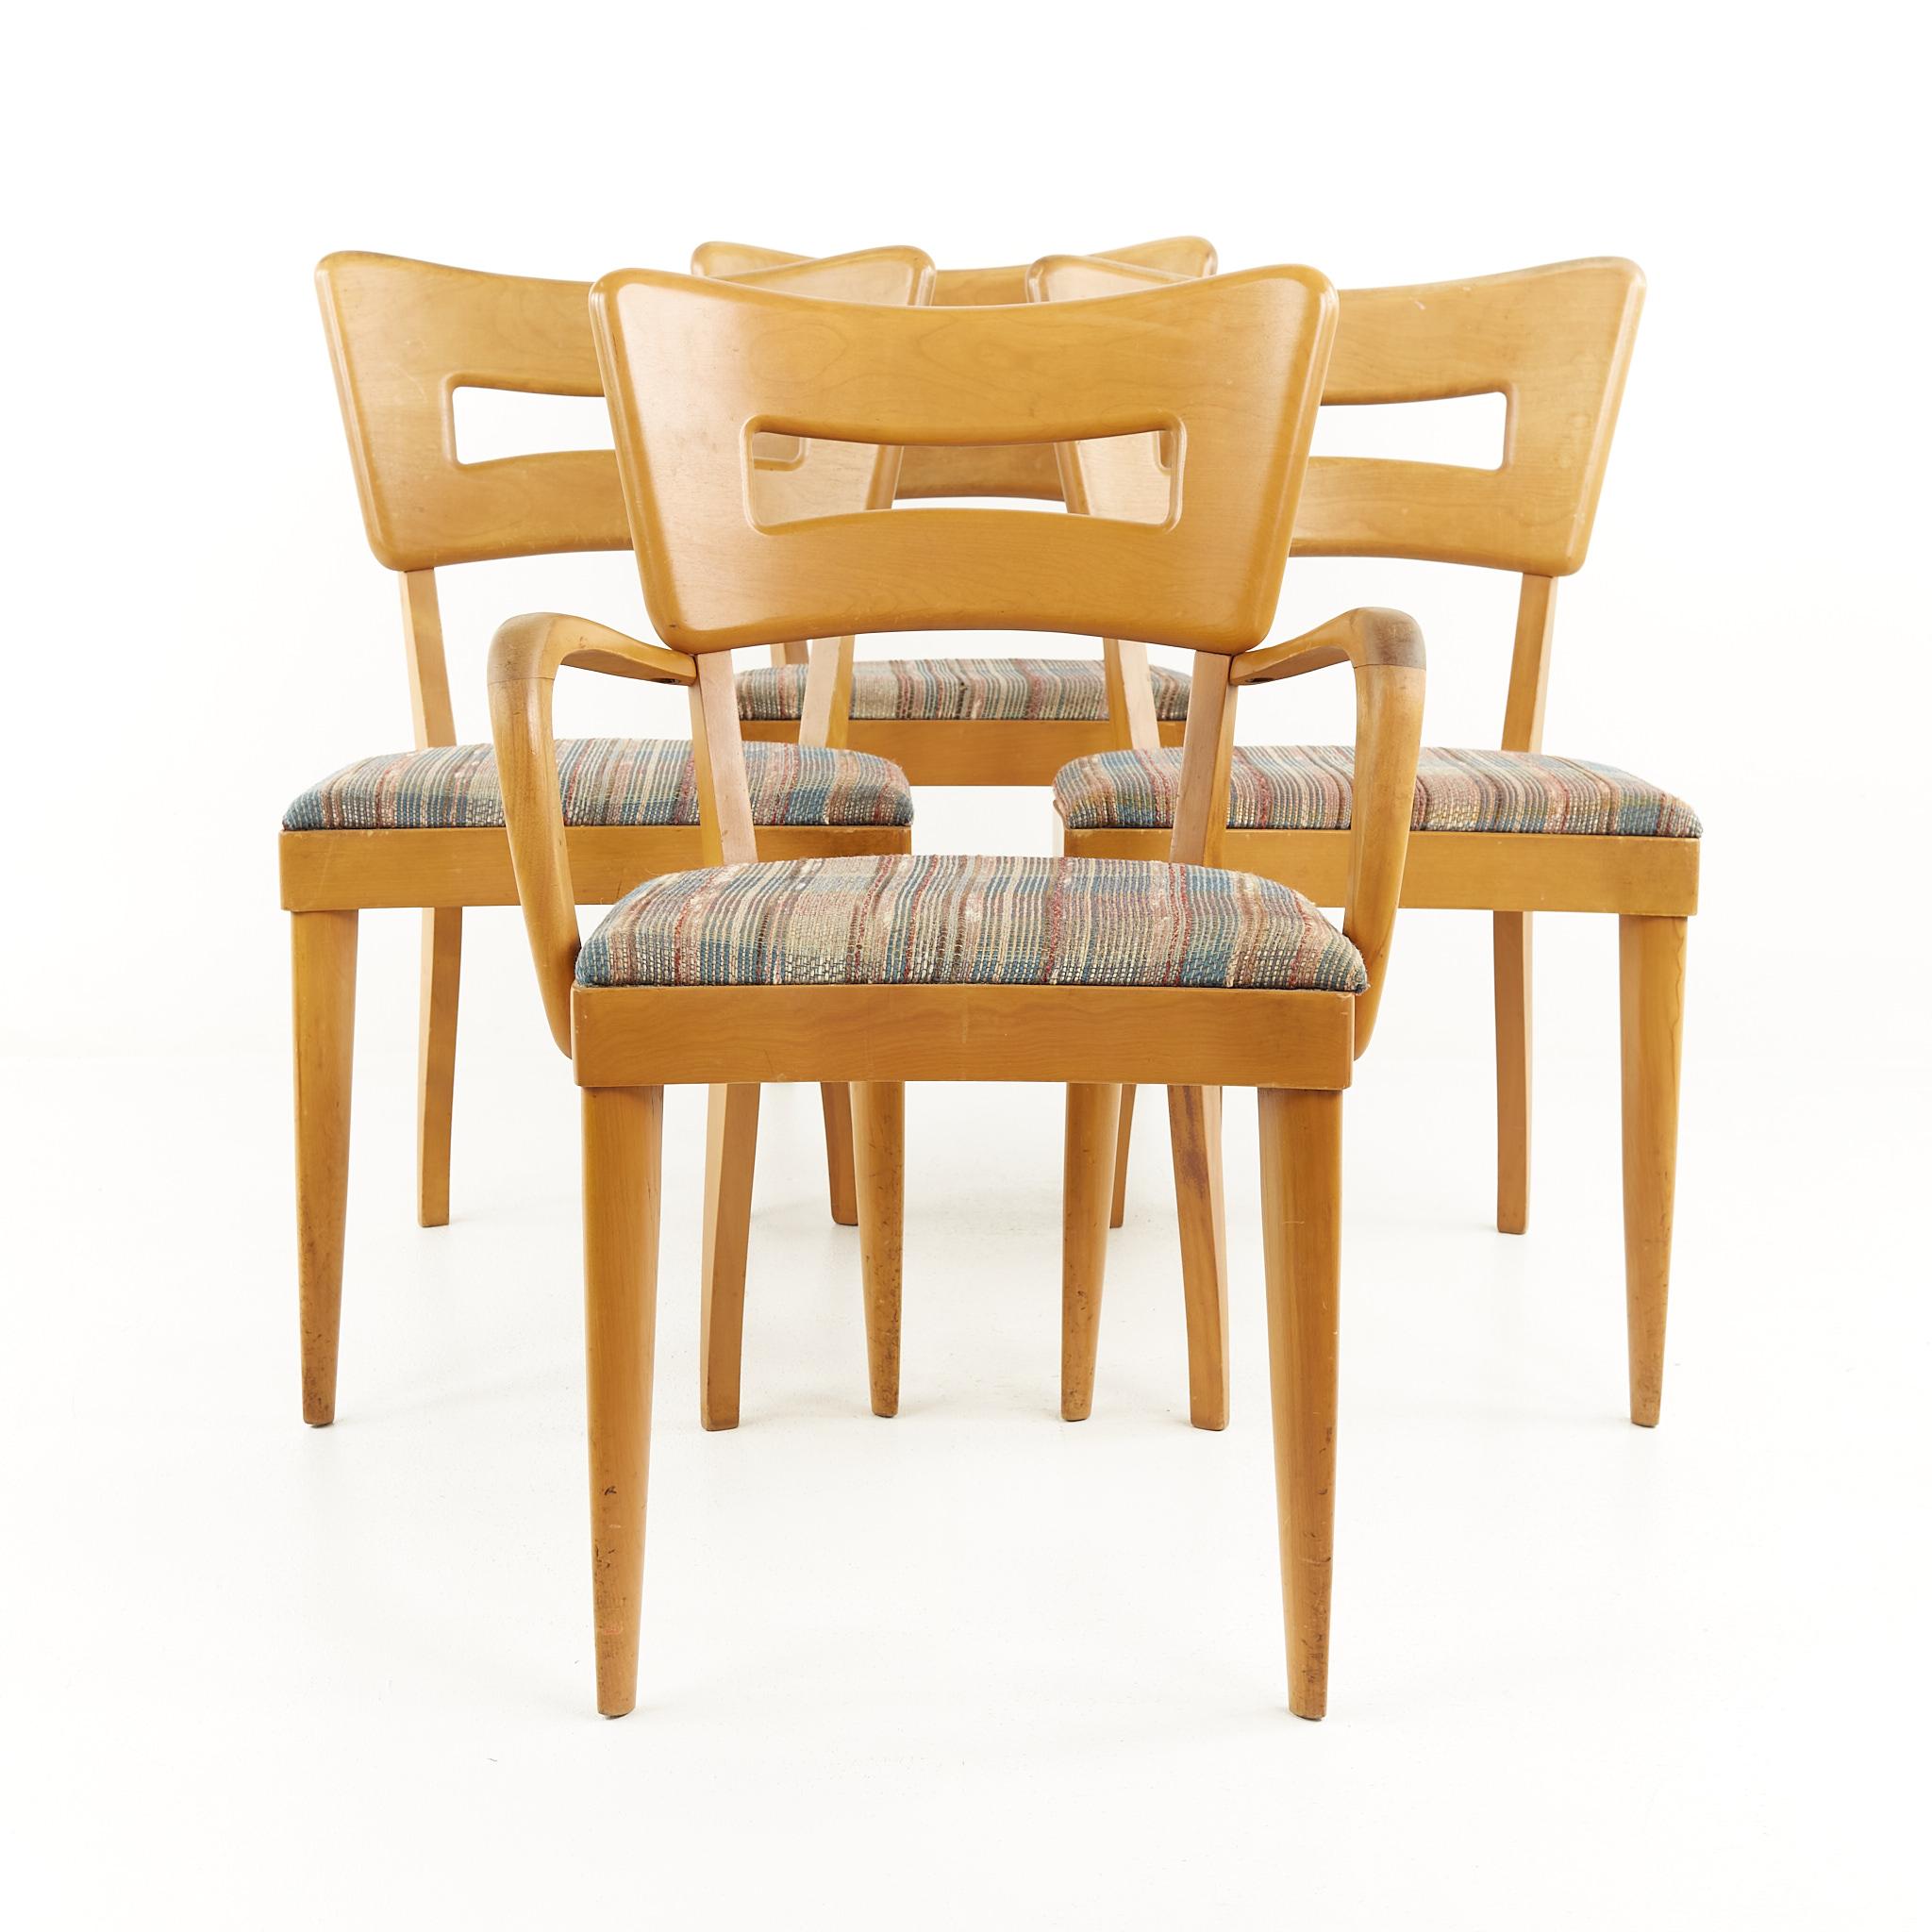 Heywood Wakefield Mid century dog bone dining chairs - set of 4

Each chair measures: 22 wide x 16 deep x 33 high, with a seat height of 17.5 inches and arm height/chair clearance of 25 inches

All pieces of furniture can be had in what we call